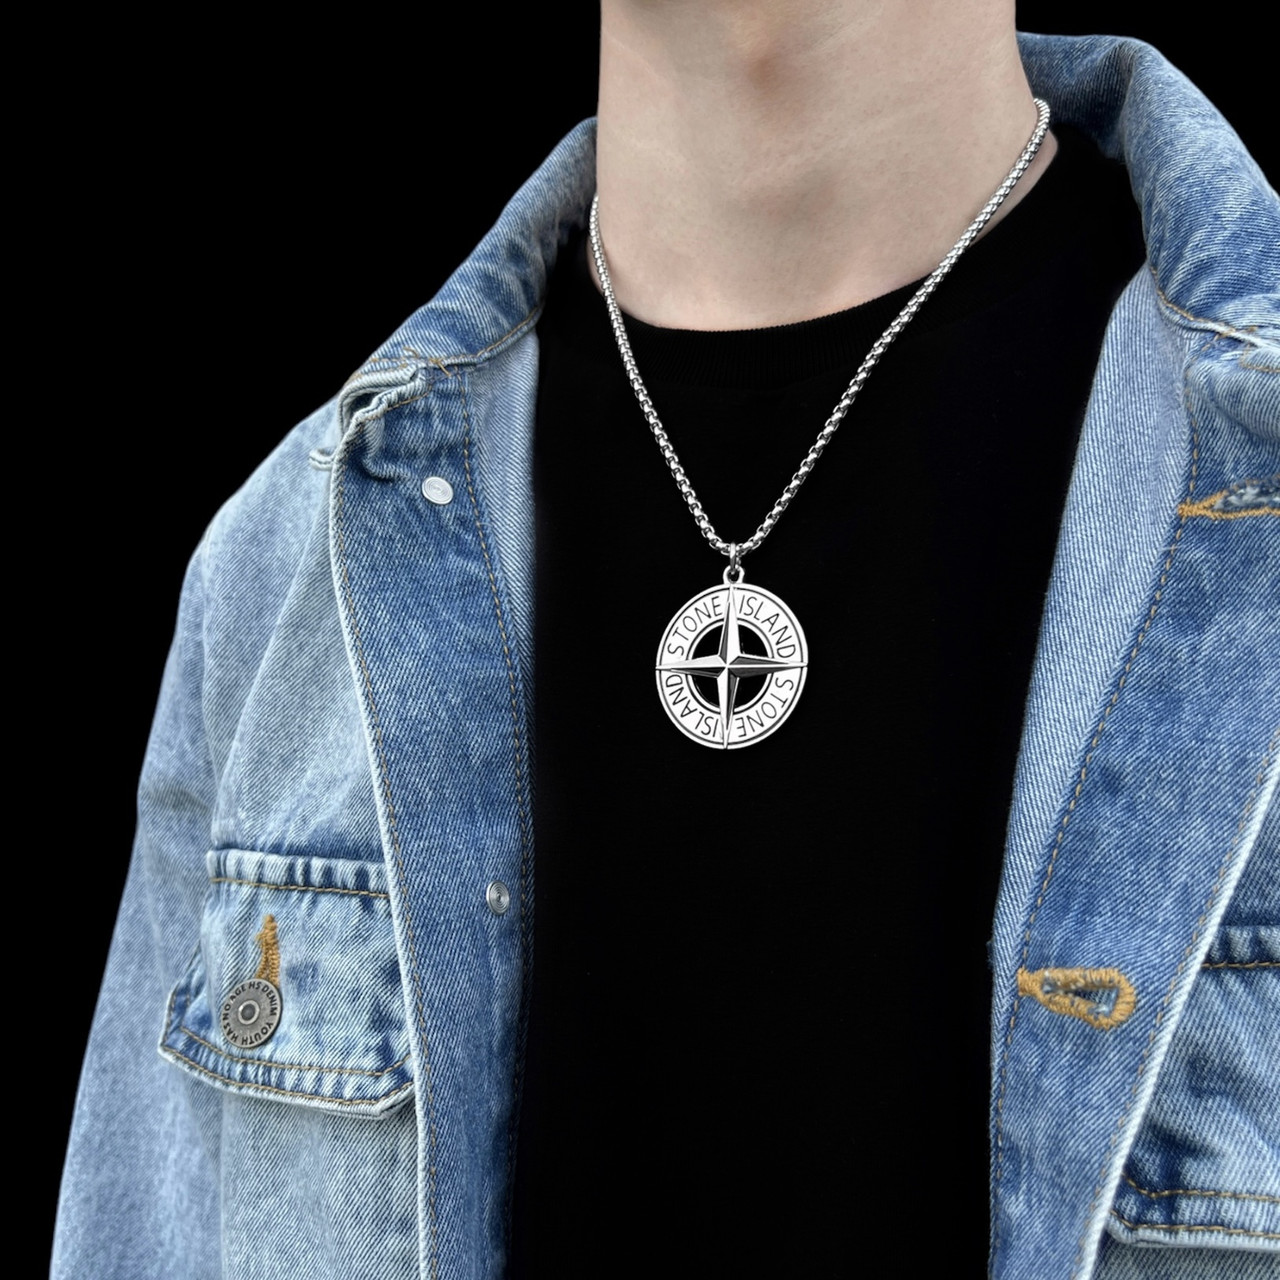 Stock 】【 Free shipping 】Stone Islandˉ necklace Cross compass necklace  American fashion brand street pendant for men and women accessories |  Lazada.co.th